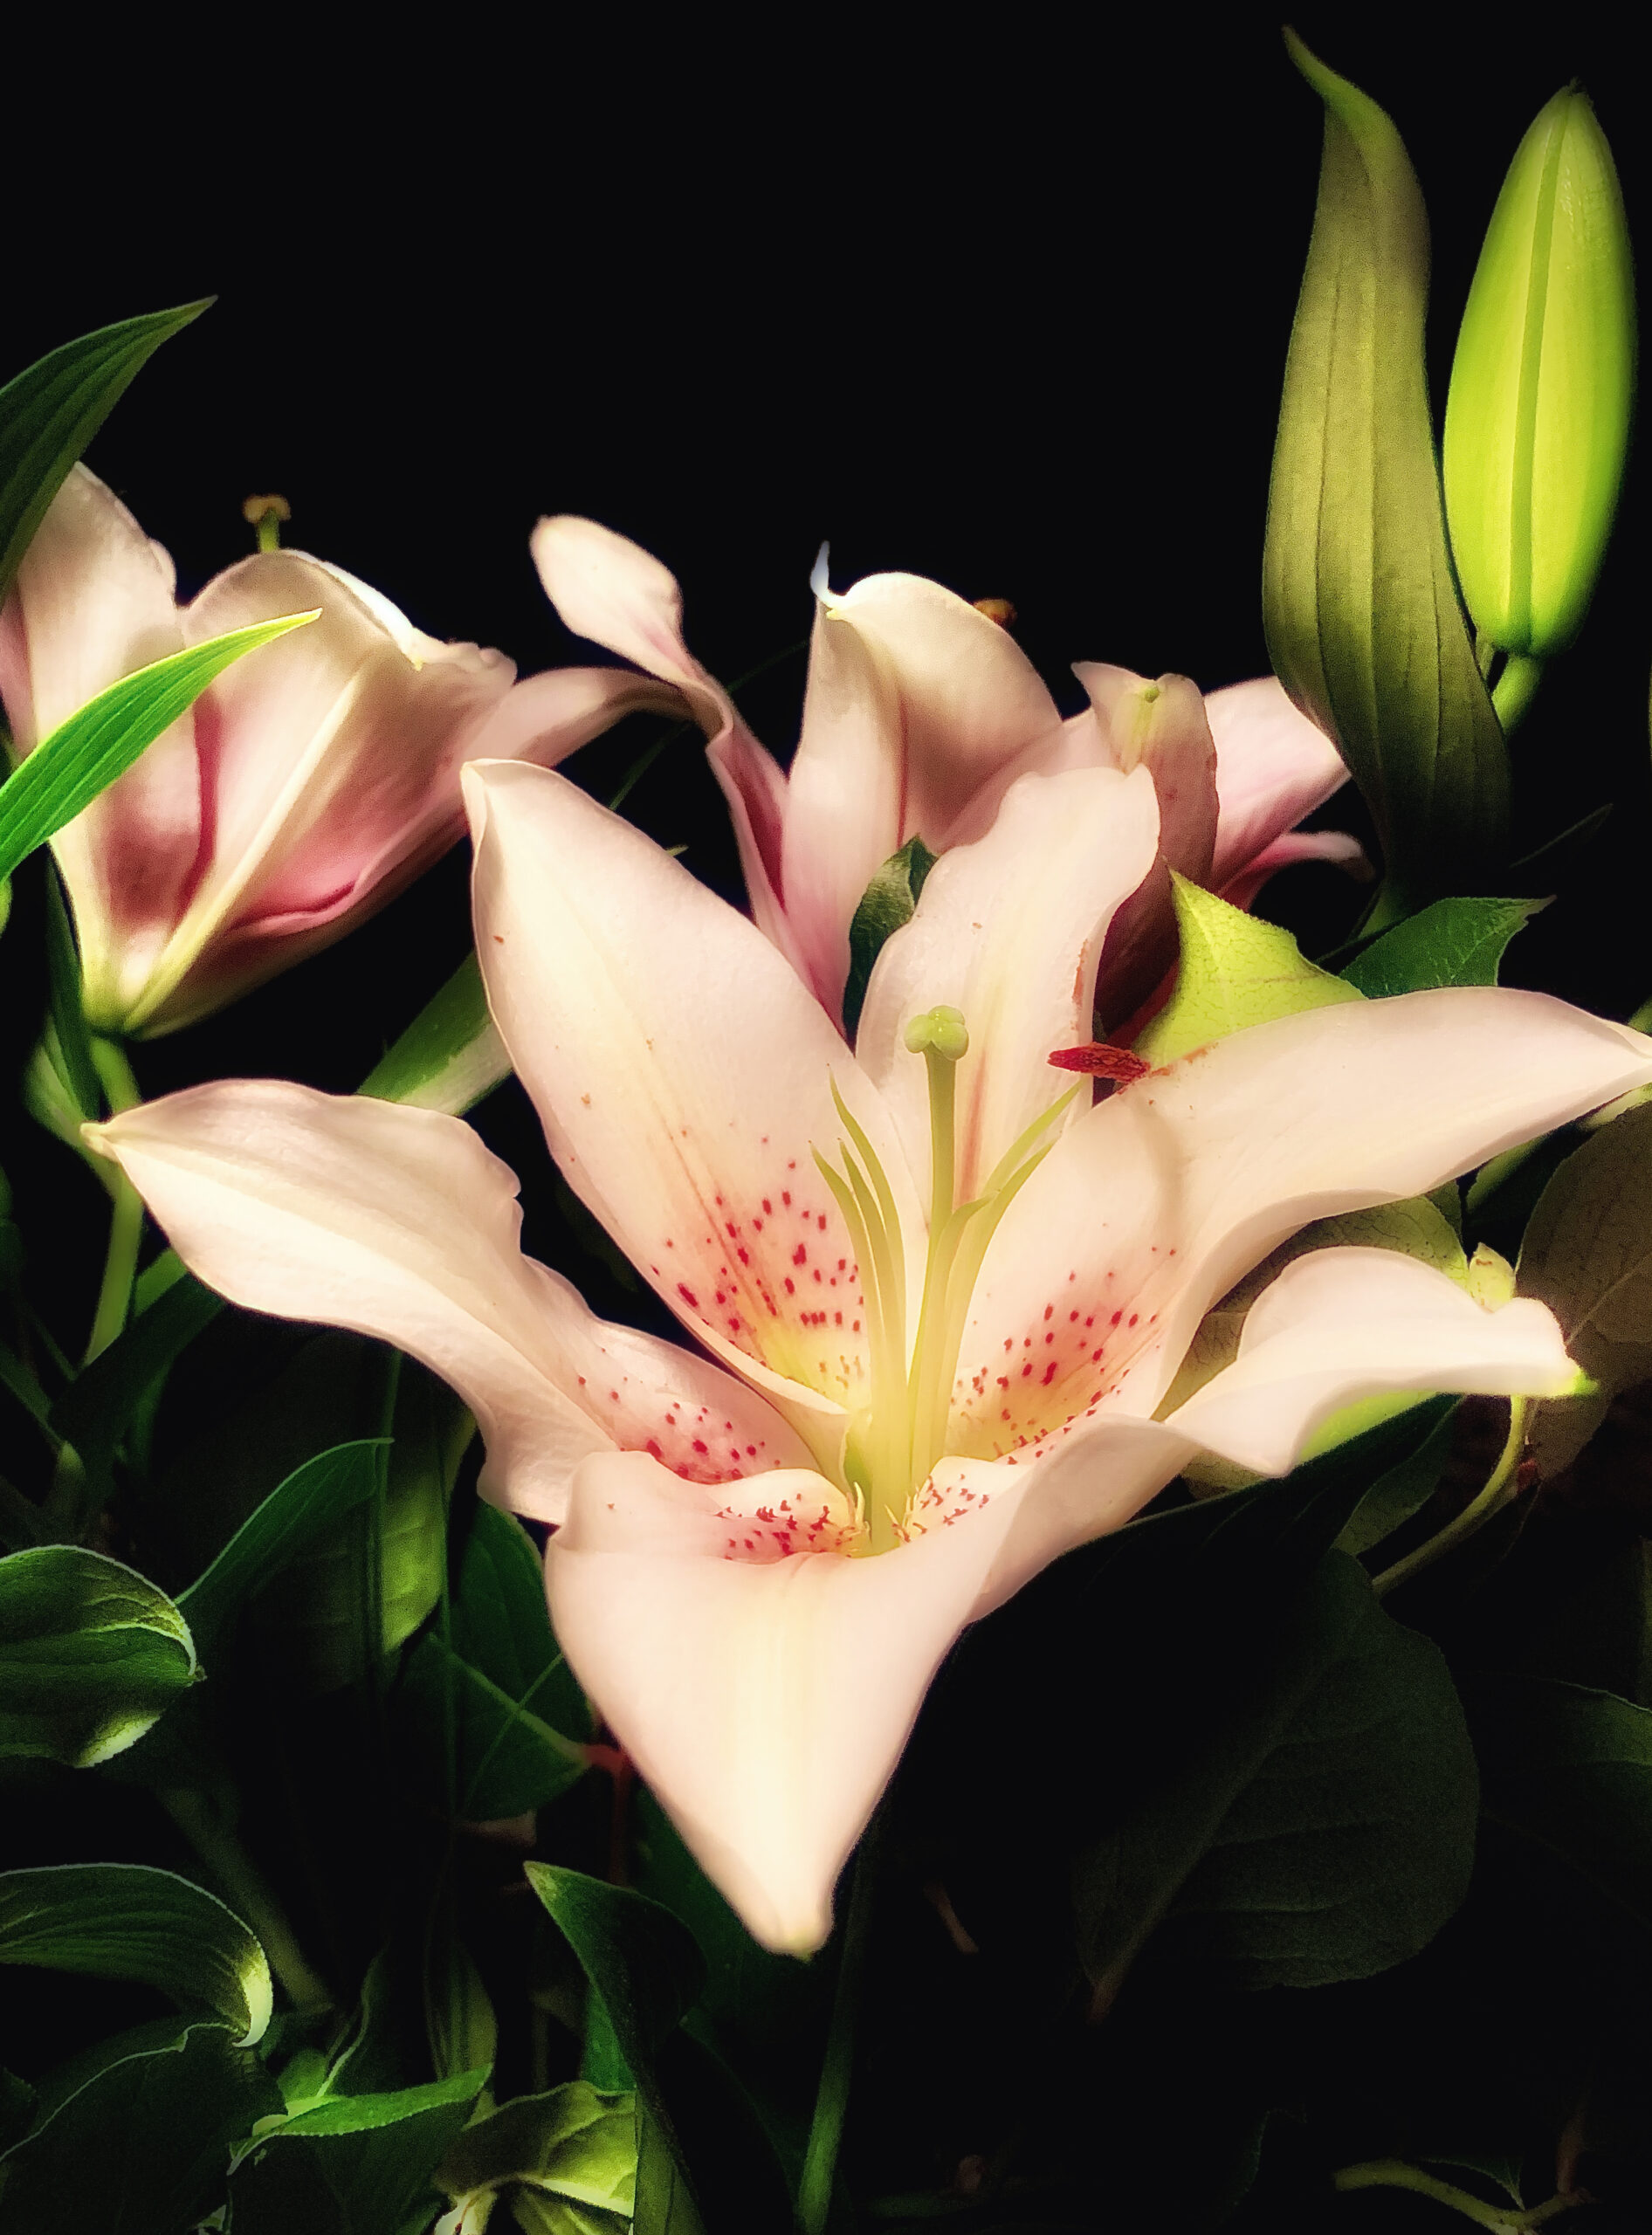 Pink lilies in a vase on a black background.